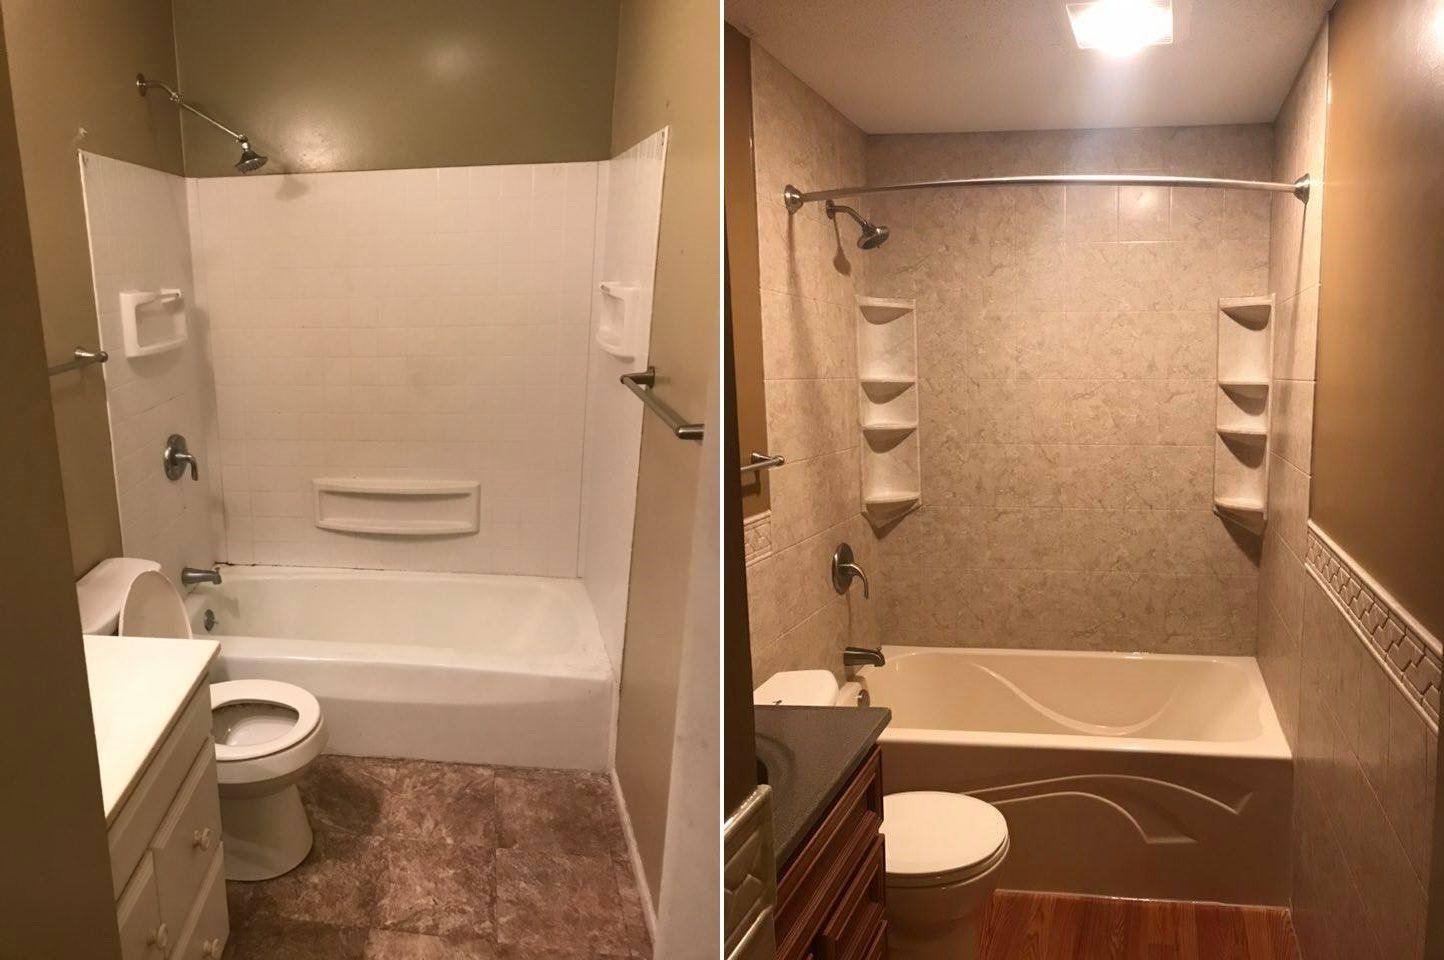 Before & After ( Tub, Walls, Vanity Tops & Cabinets, Floors, Wainscoting & Toilet)